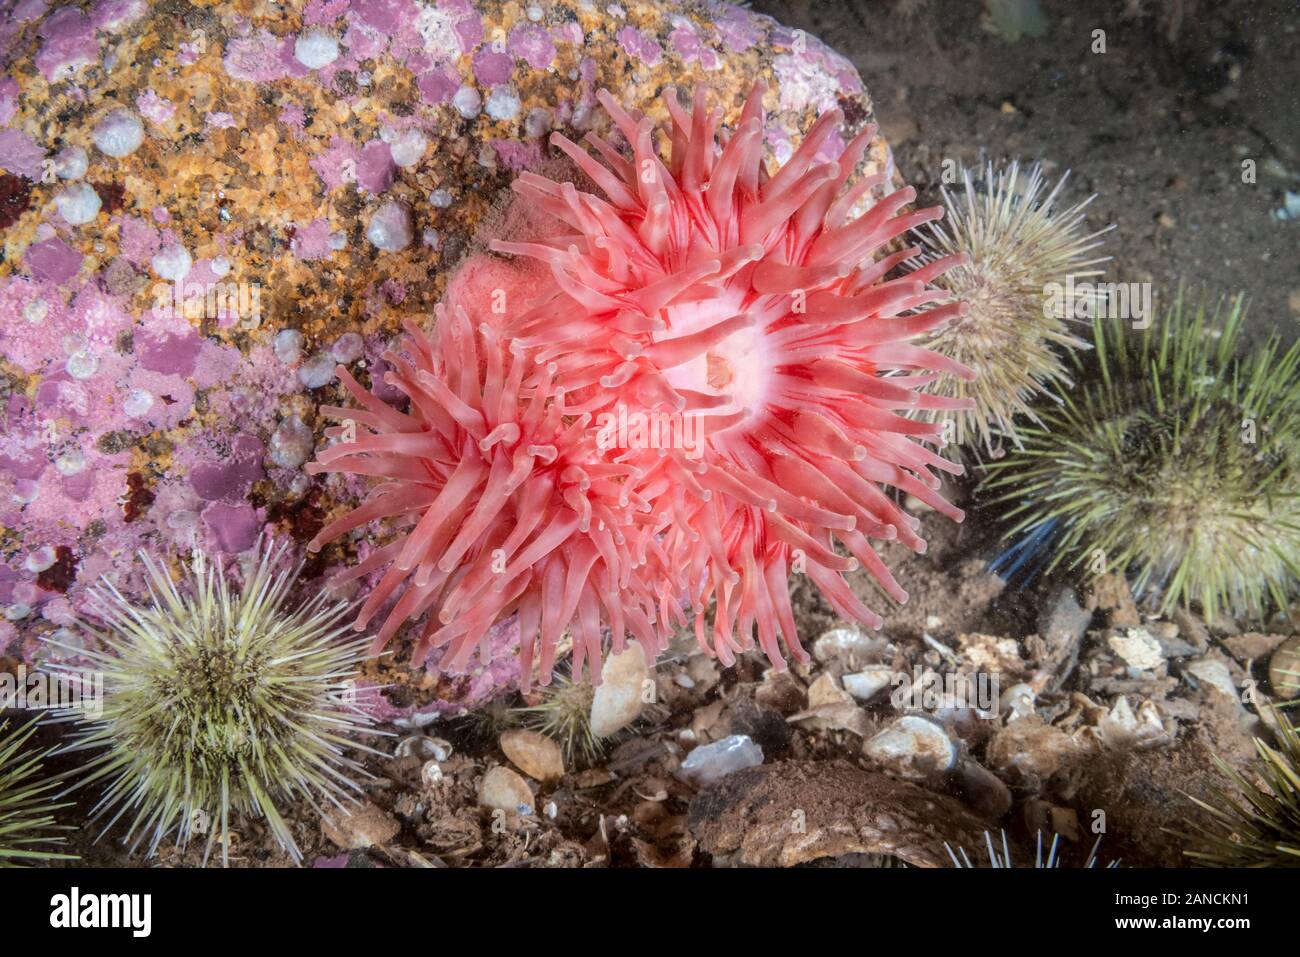 Northern Red Anemone, (Urticina felina), The anemone is in the process of growing another oral disk probably due to an injury. Maine. Gulf of Maine Stock Photo